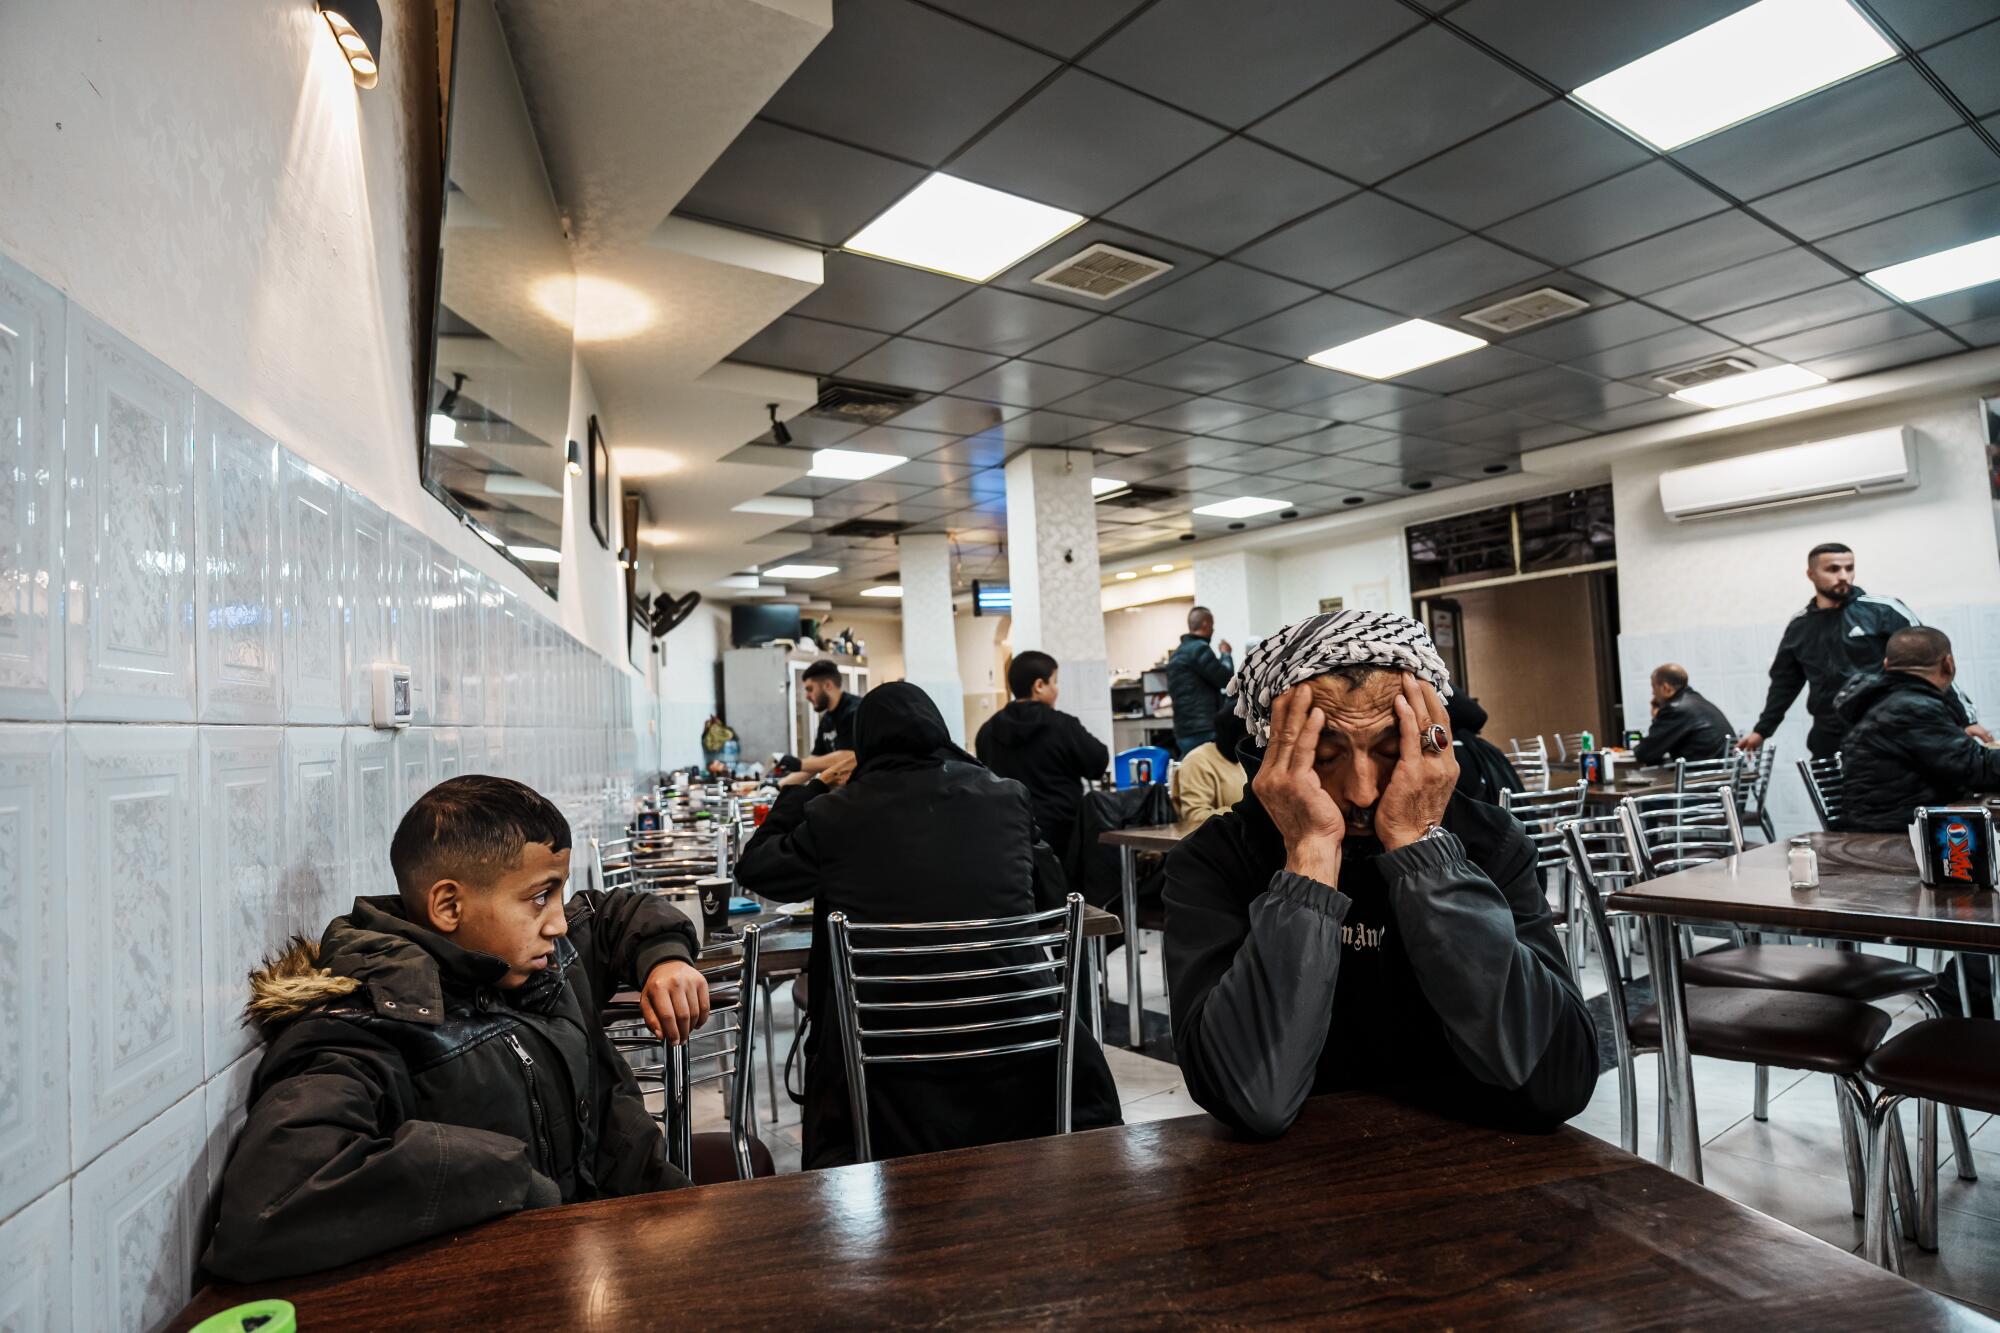 Nawaz Salaymah and his son Ayham Salaymah, 13, sit down for lunch after AyhamOs court appearance